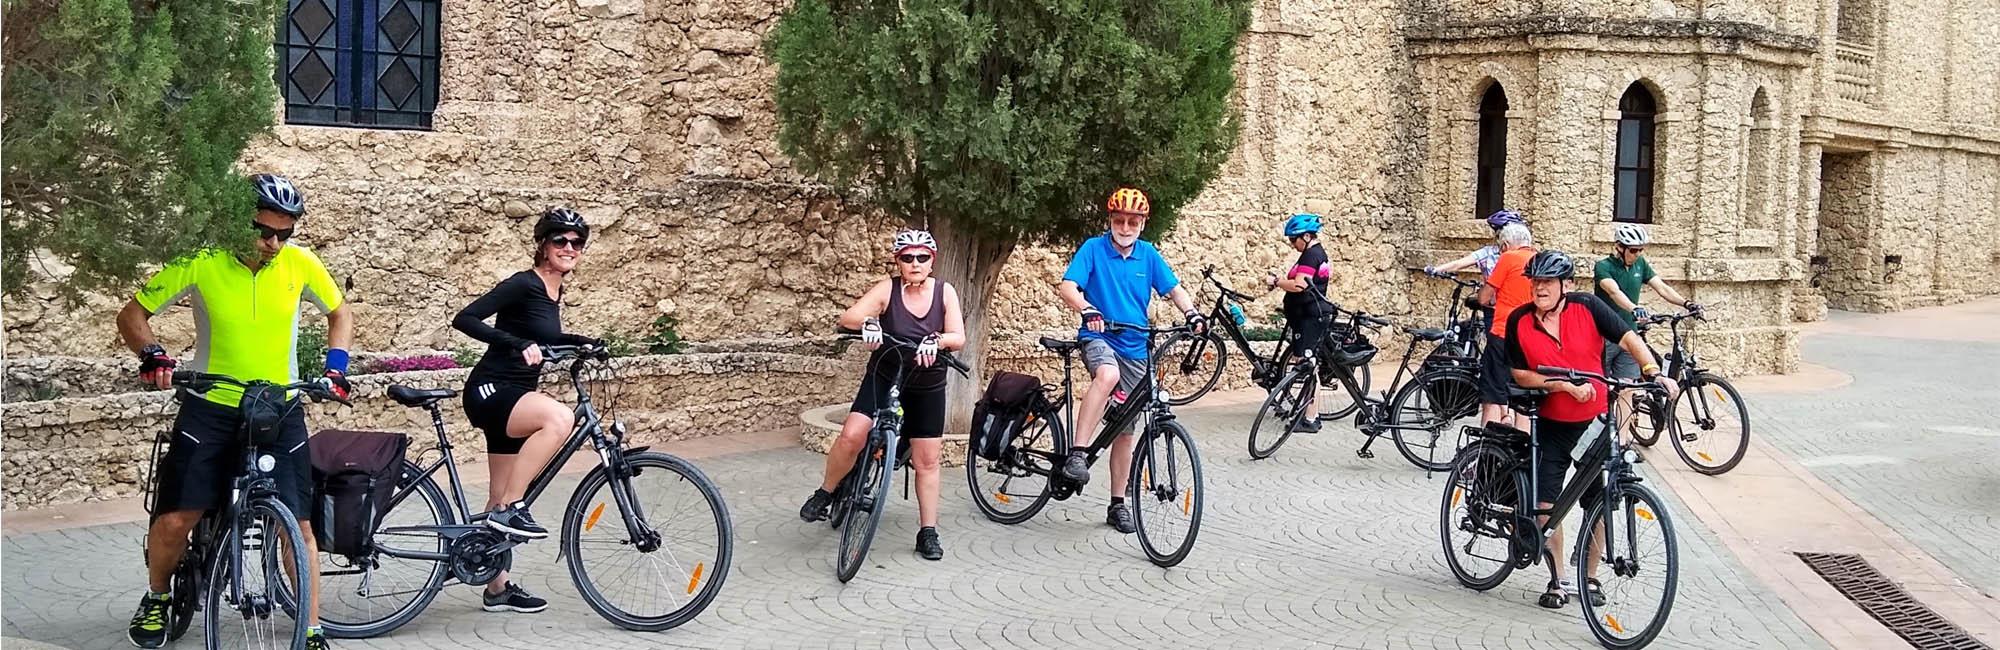 Group of cyclists in Murcia